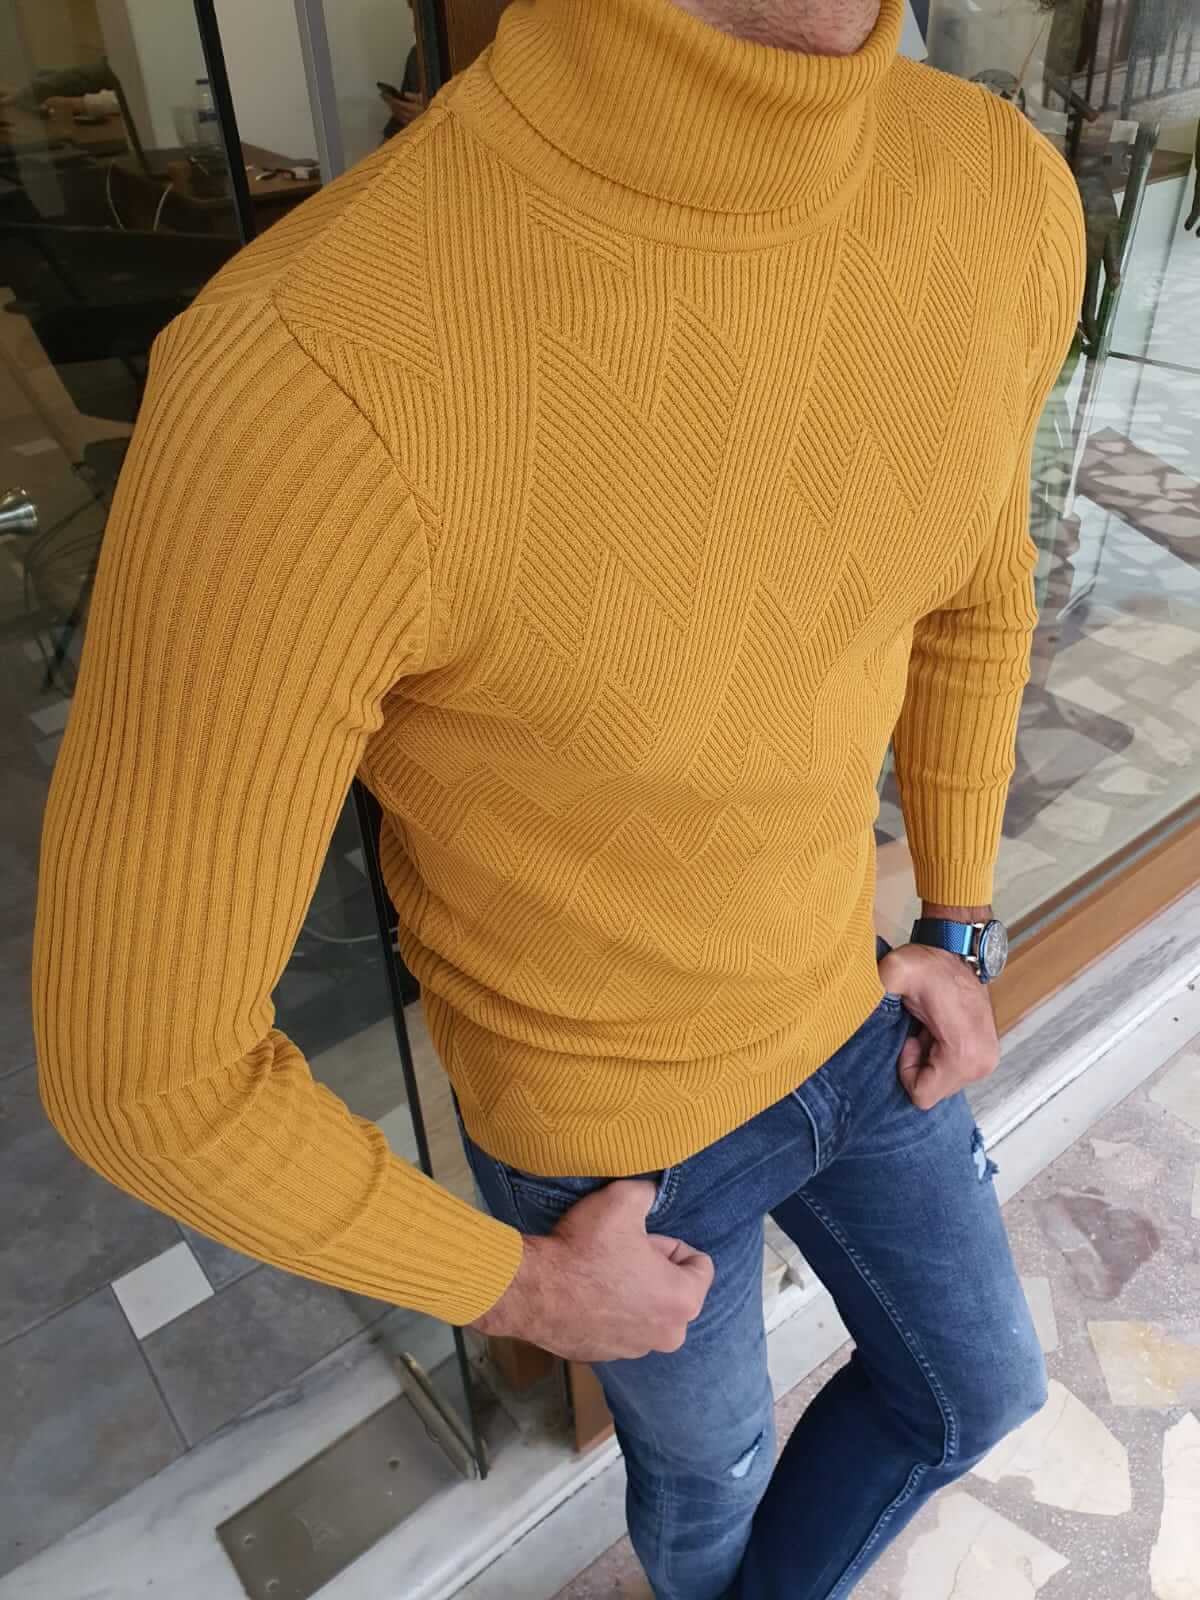 A yellow long sleeve turtleneck sweater, featuring a high neckline and fitted sleeves."